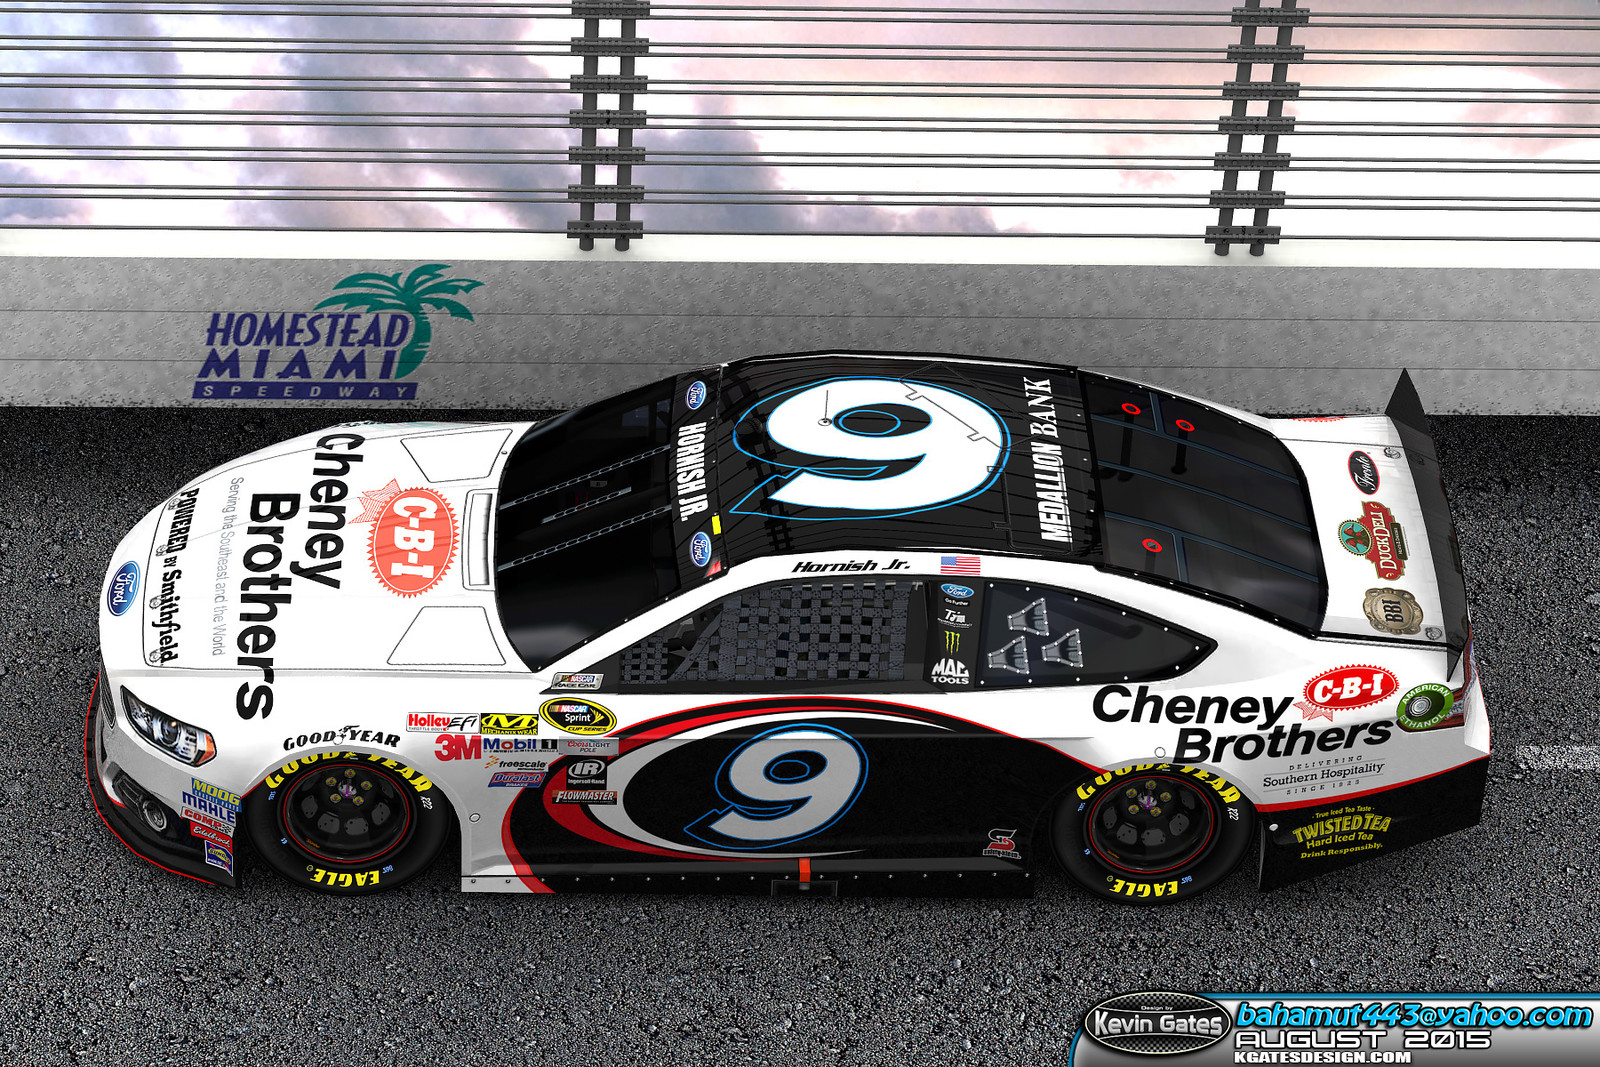 Original Autodesk 3DS Max Daytona track render of the finalized 2015 #9 Cheney Brothers, Inc. Ford Fusion driven by NASCAR Sprint Cup Series driver Sam Hornish Jr. of Richard Petty Motorsports